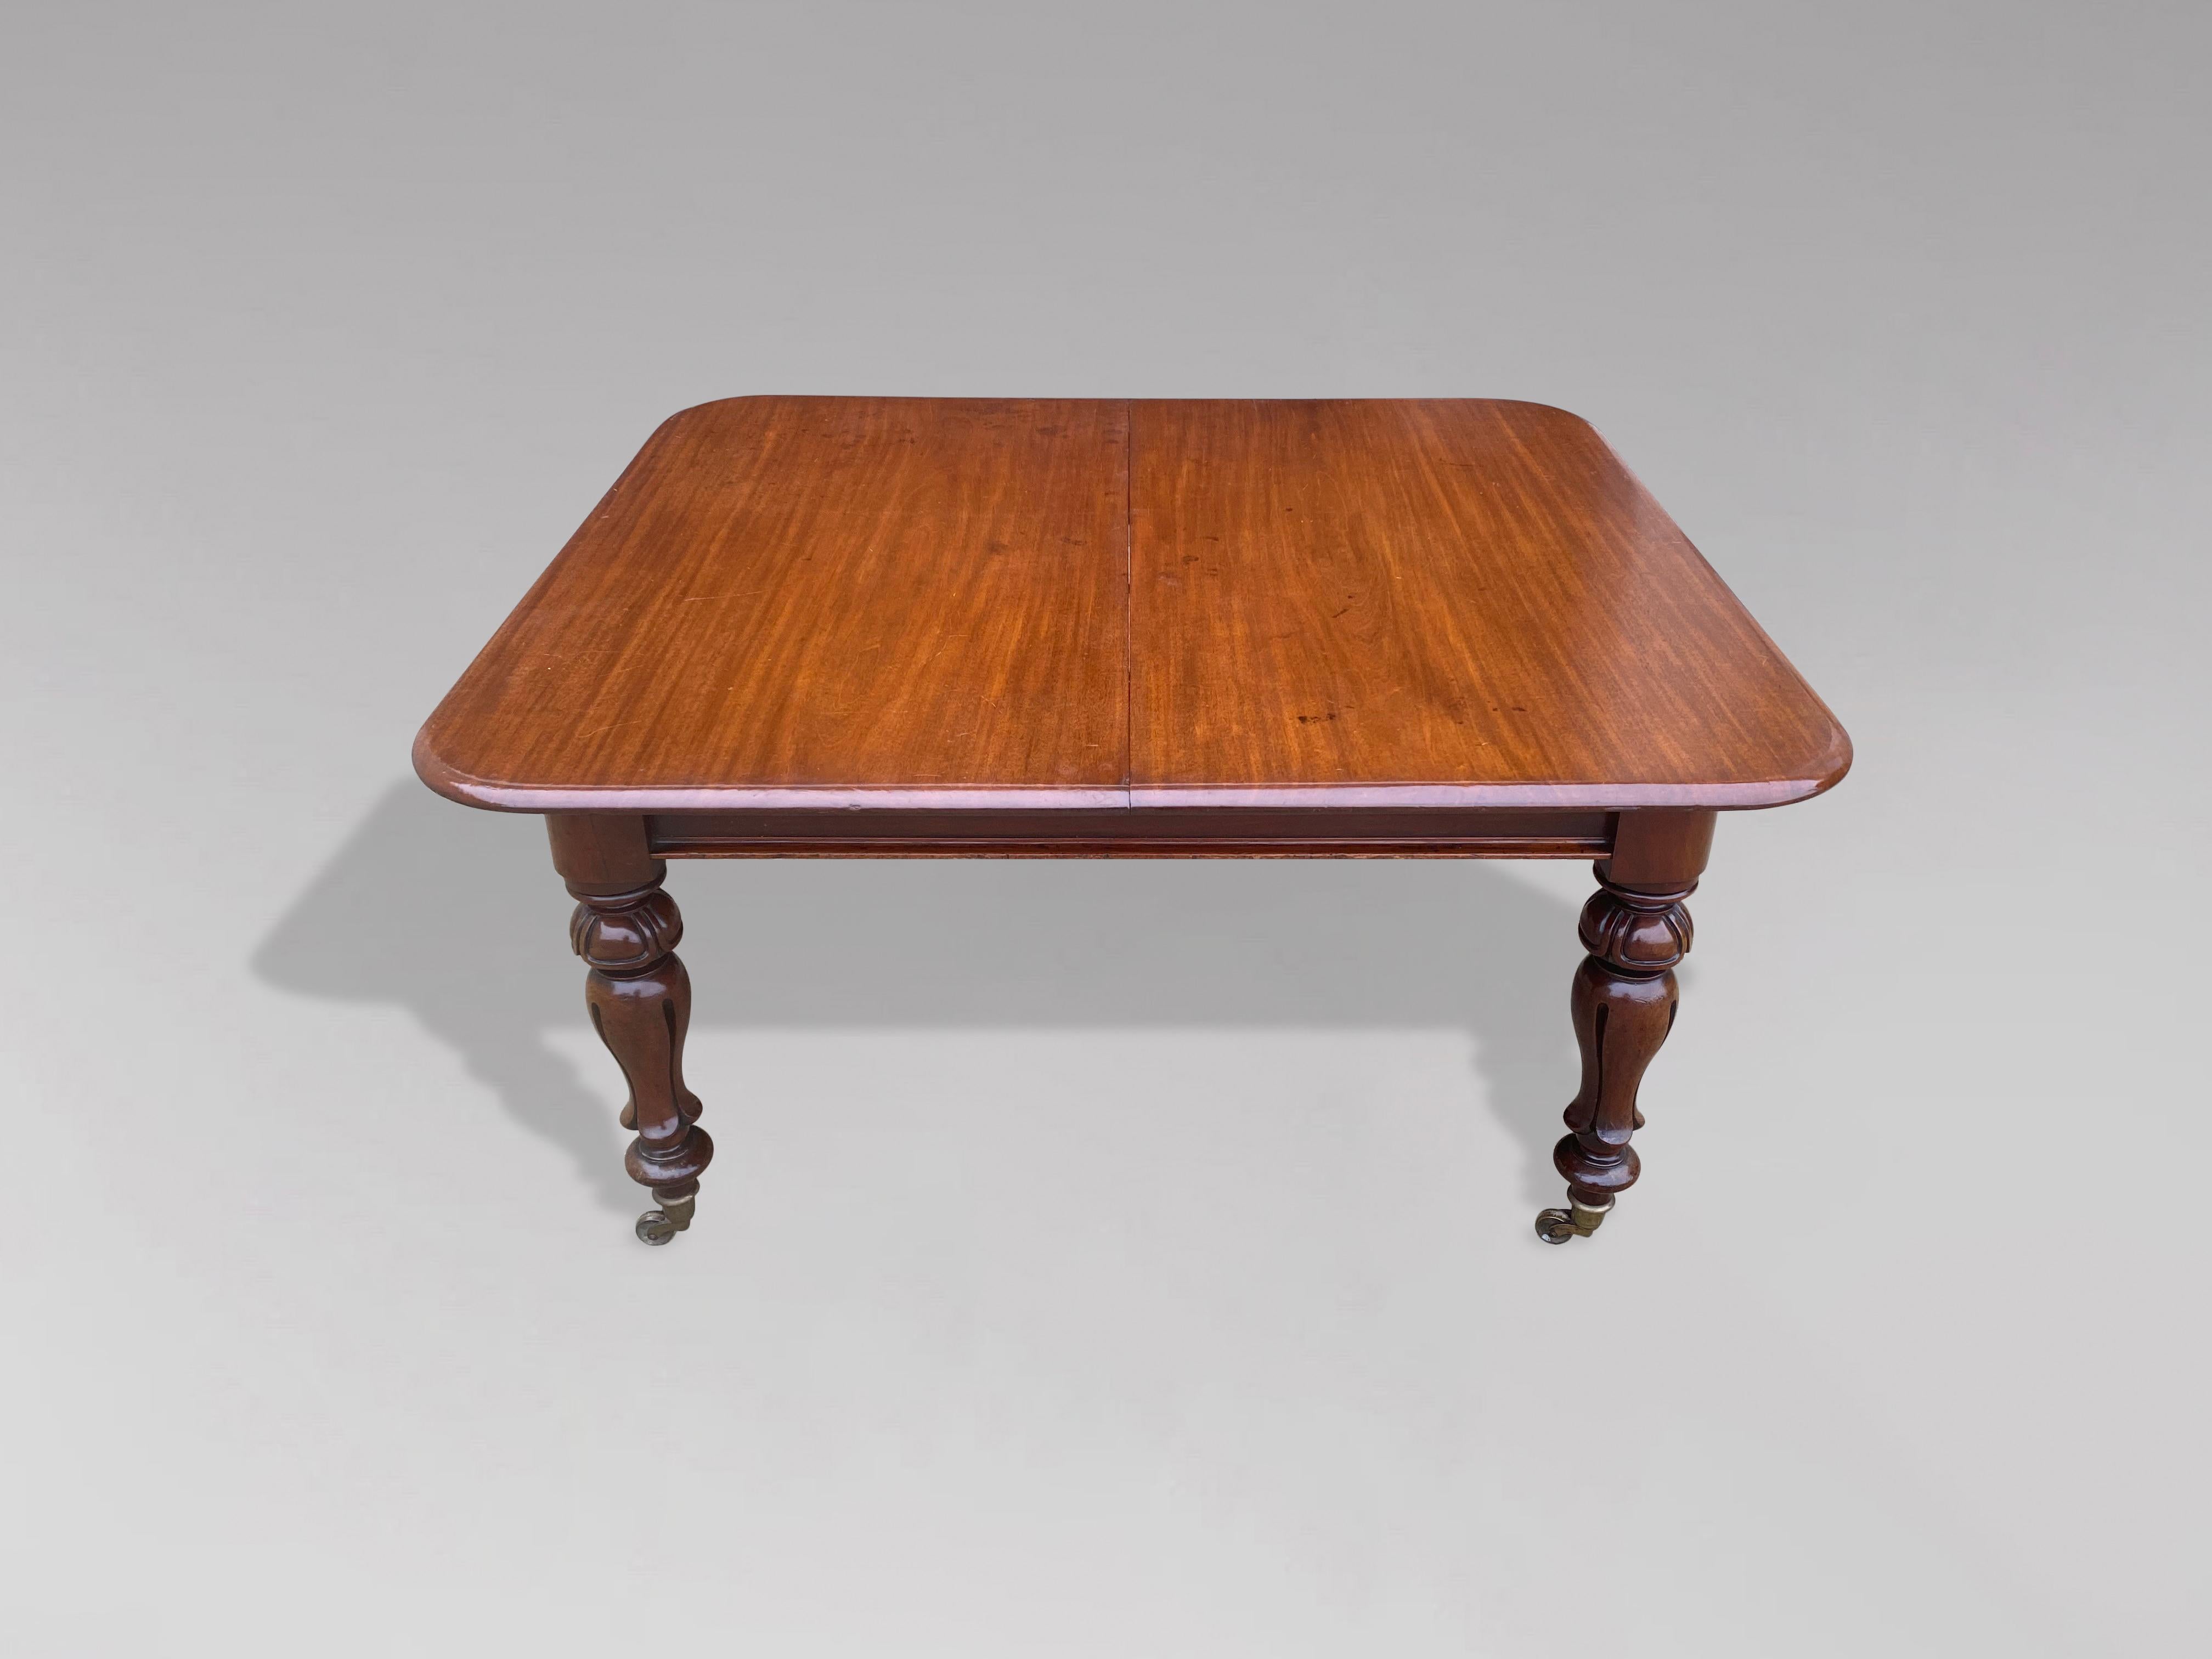 19th Century William IV Period Mahogany Dining Table In Good Condition For Sale In Petworth,West Sussex, GB